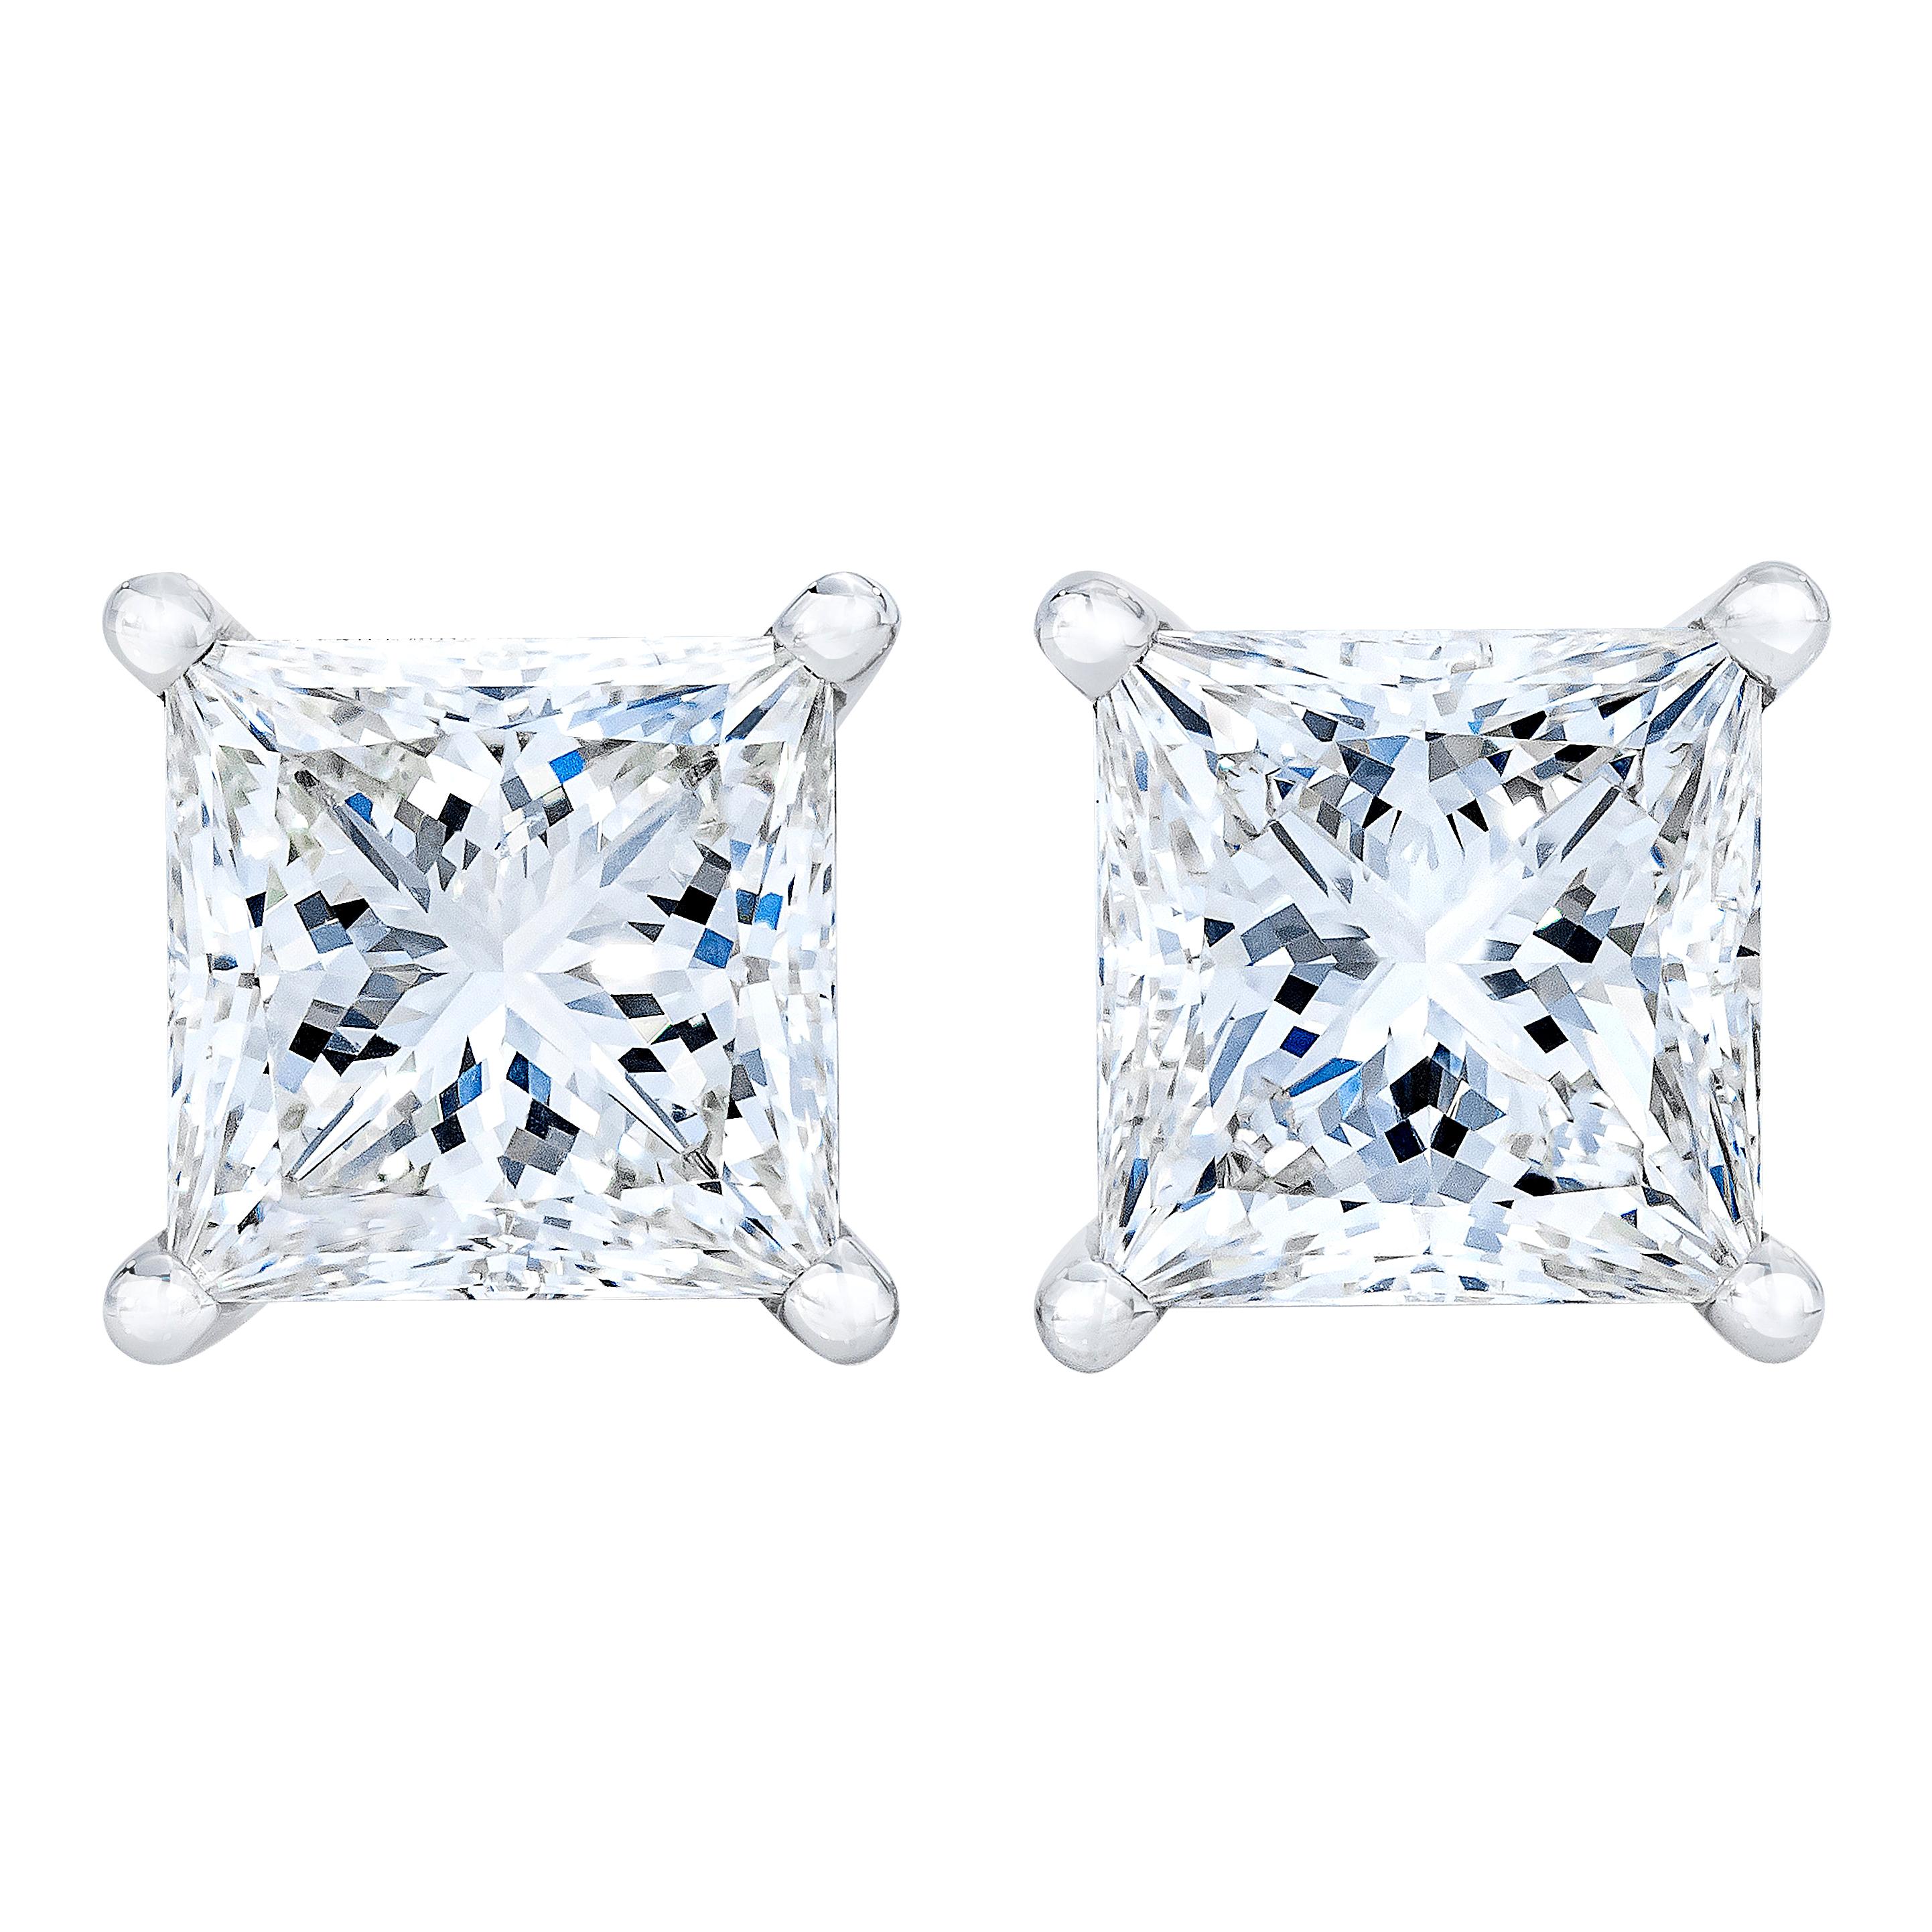 Celebrate any occasion with these classic shimmering diamond stud earrings. Fashioned in 14K gold, each earring showcases a sparkling square shaped, brilliant cut certified diamond solitaire. Dazzling with a bright polished shine, these post